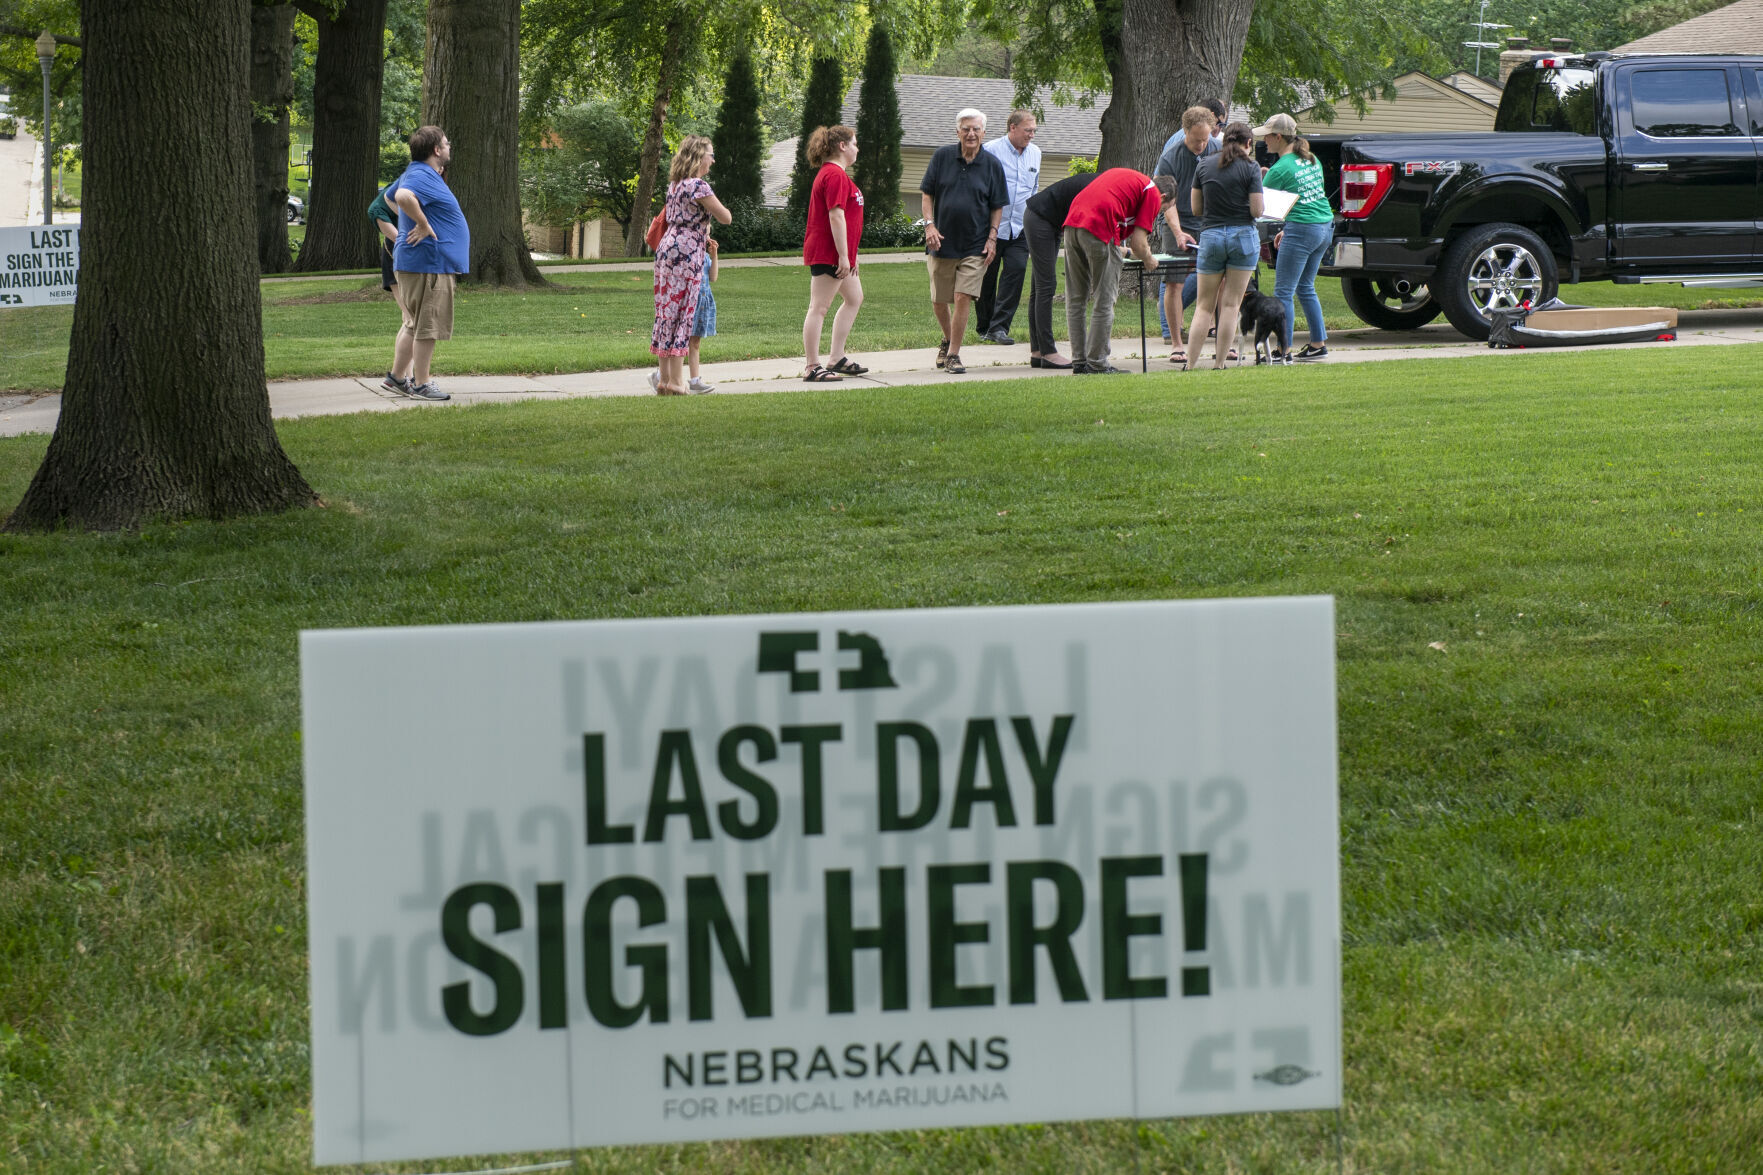 Medical marijuana petitions to be turned in amid legal uncertainty of requirements in Nebraska